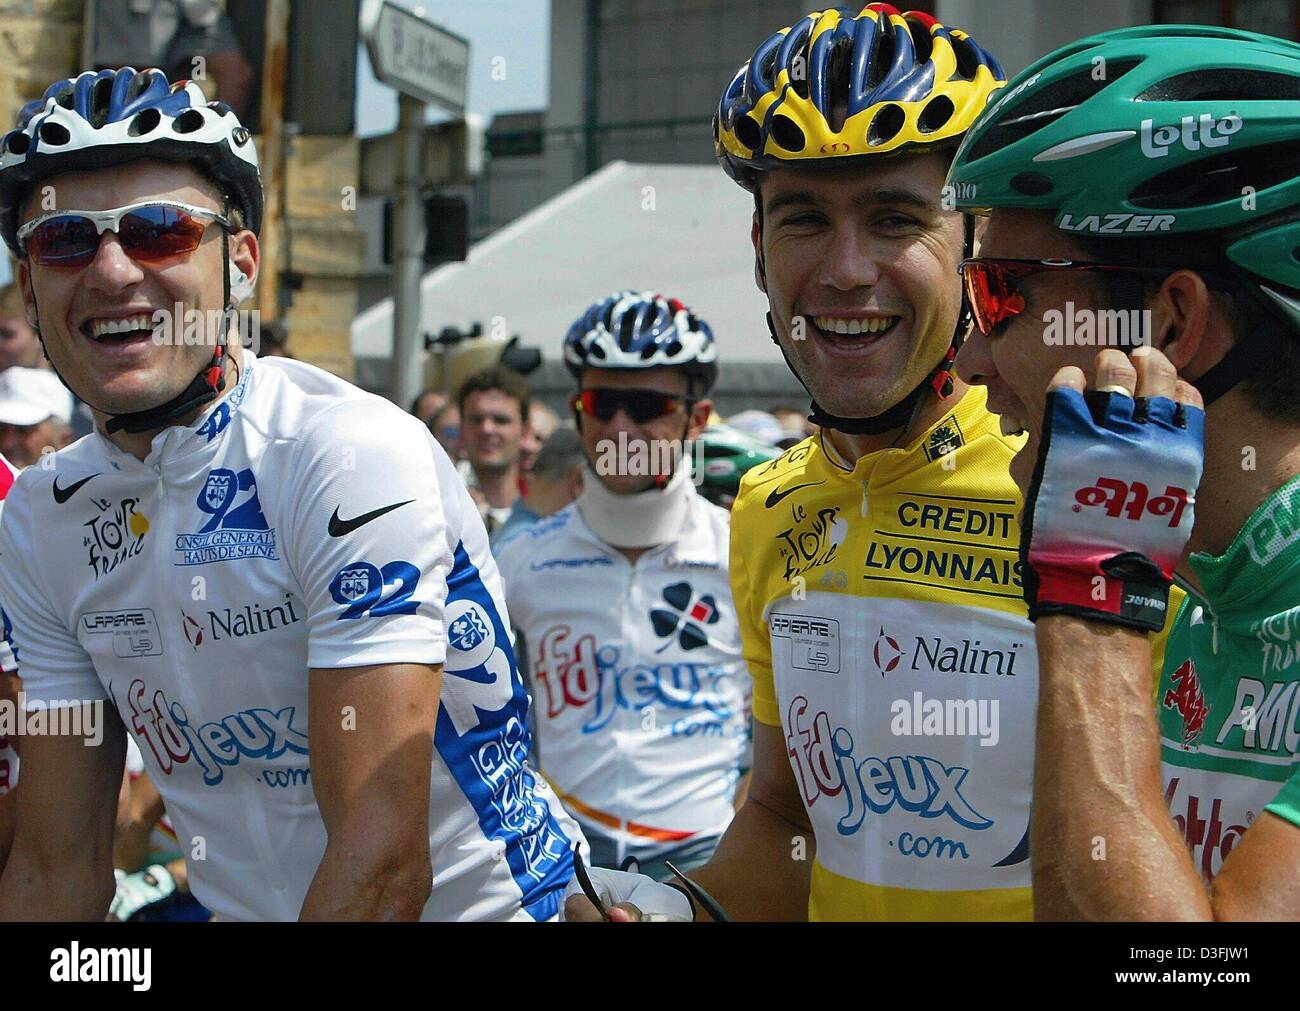 (dpa) - Australians (L-R) 2nd stage winner Baden Cooke of the team FDJeux, teammate Bradley McGee wearing the leader's yellow jersey and best sprinter Robbie McEwen of Lotto-Domo with the green jersey share a laugh prior to the start of the third stage of the Tour de France cycling race, in Charleville-Mezieres, France, 8 July 2003. In the background French Jimmi Casper, who wears  Stock Photo